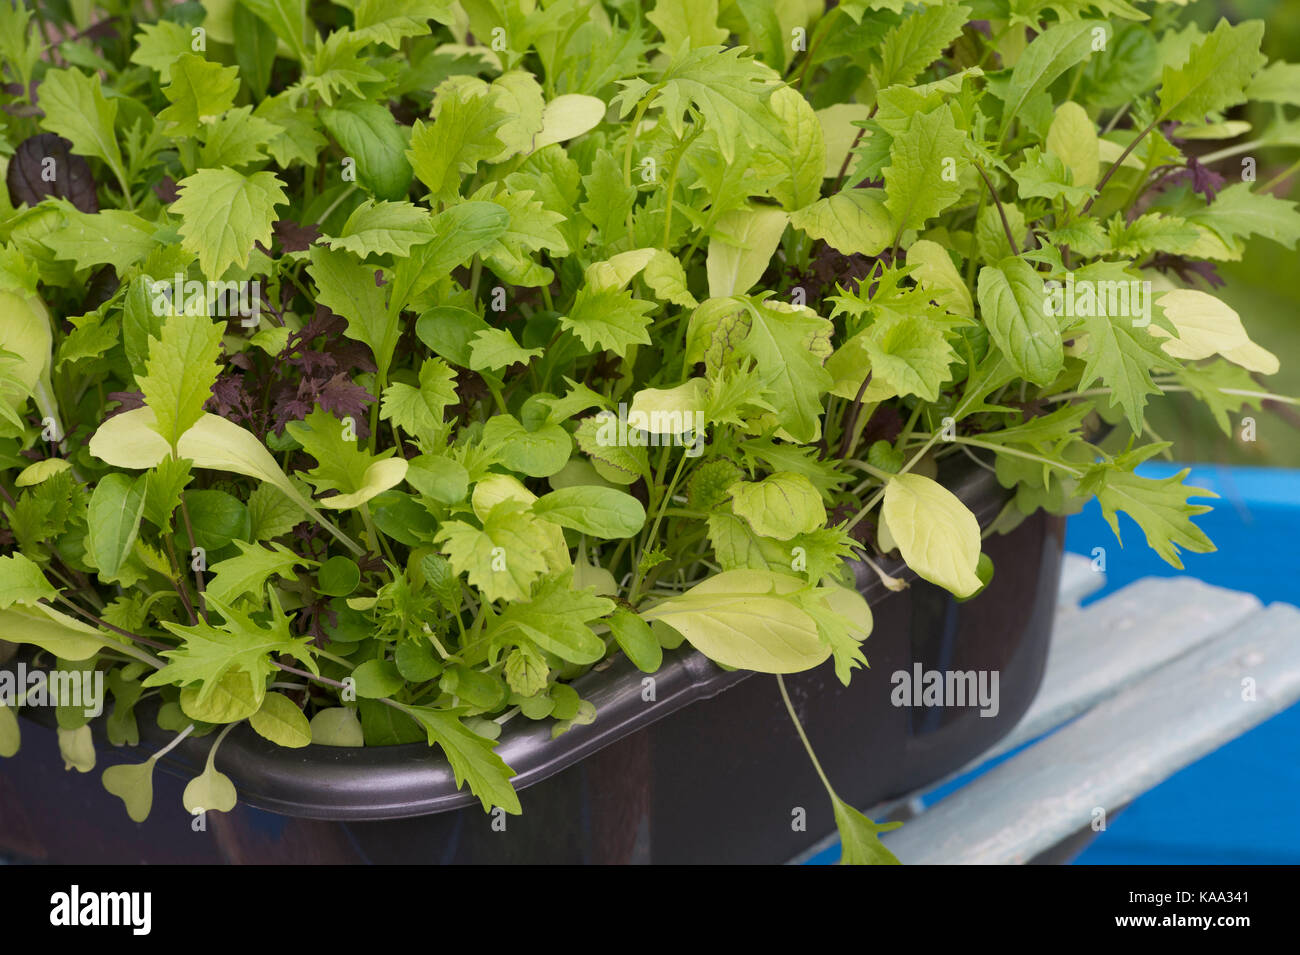 Mixed salad leaves grown in a container in september. UK Stock Photo